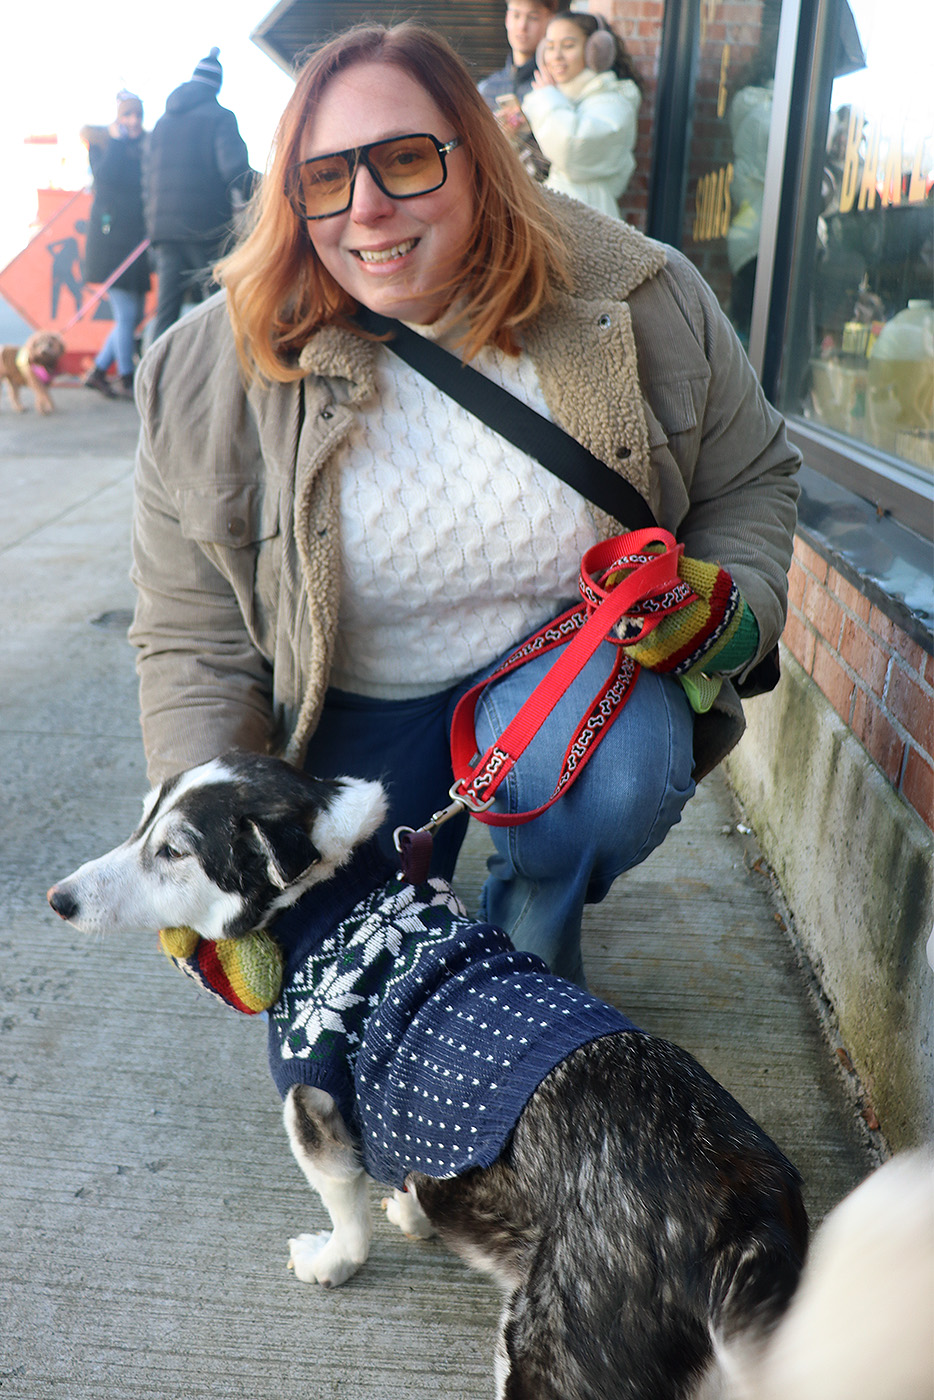 A woman kneels down beside her black and white dog wearing a blue sweater.